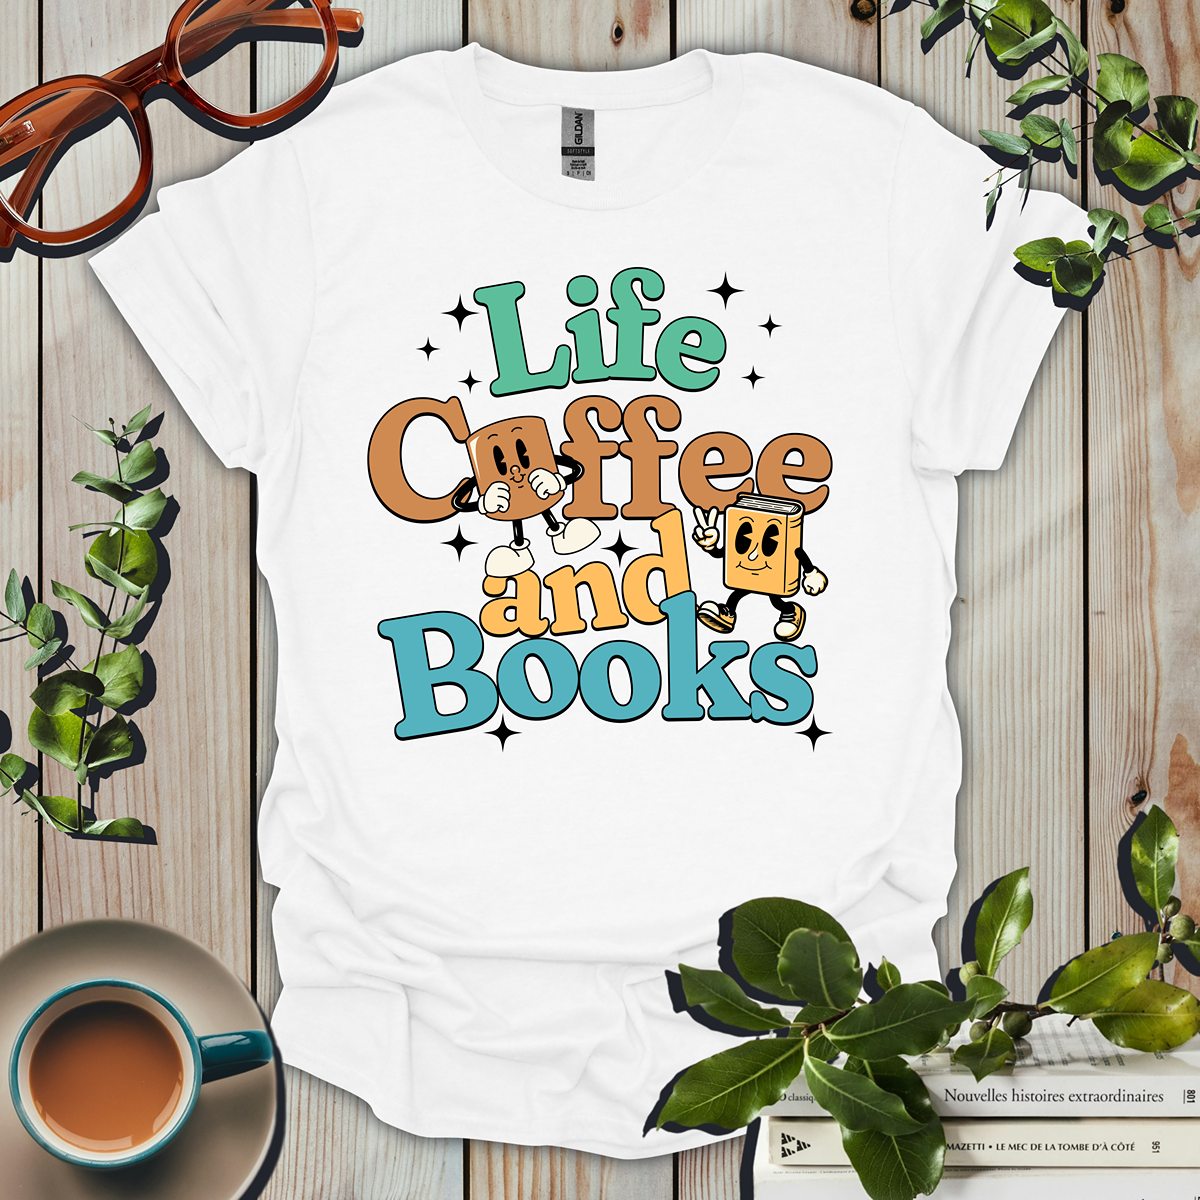 Life Coffee And Books T-Shirt